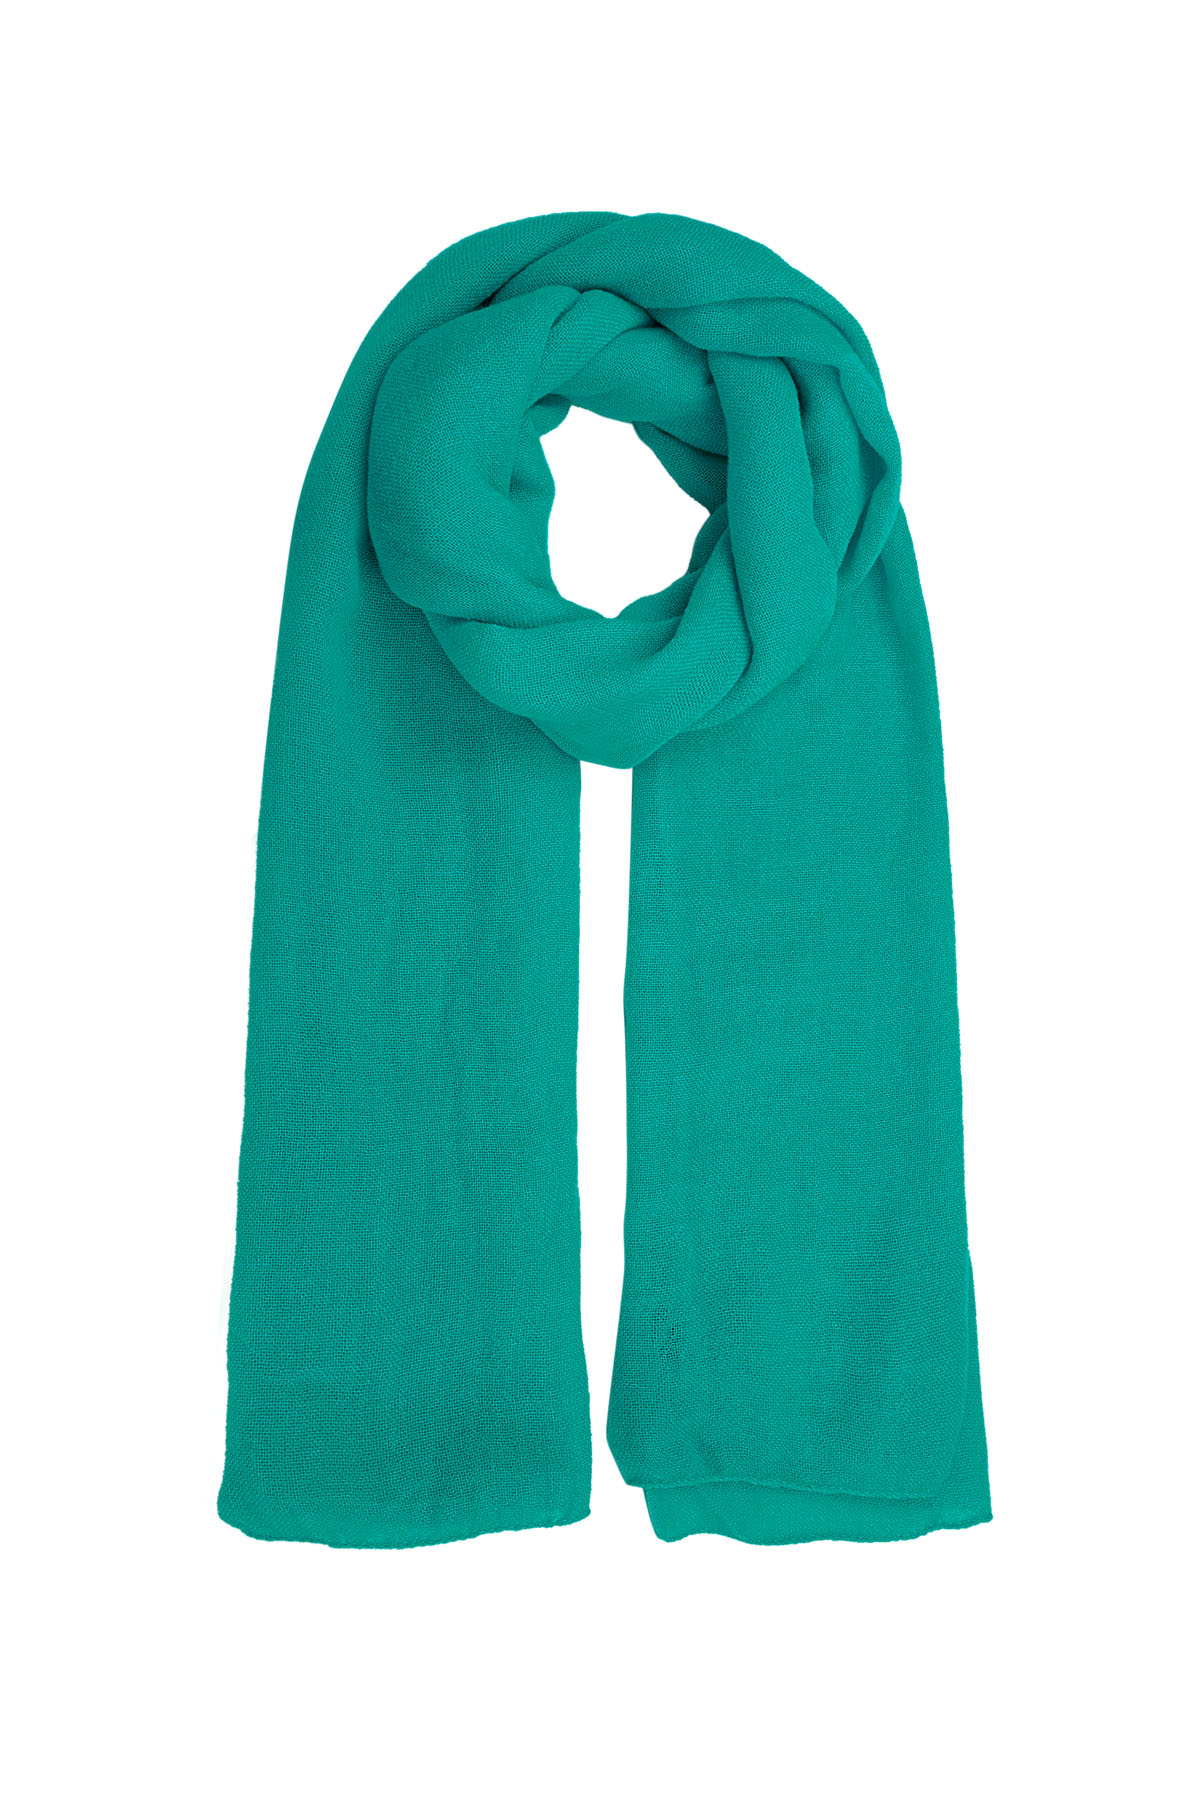 Scarf solid color - turquoise h5 